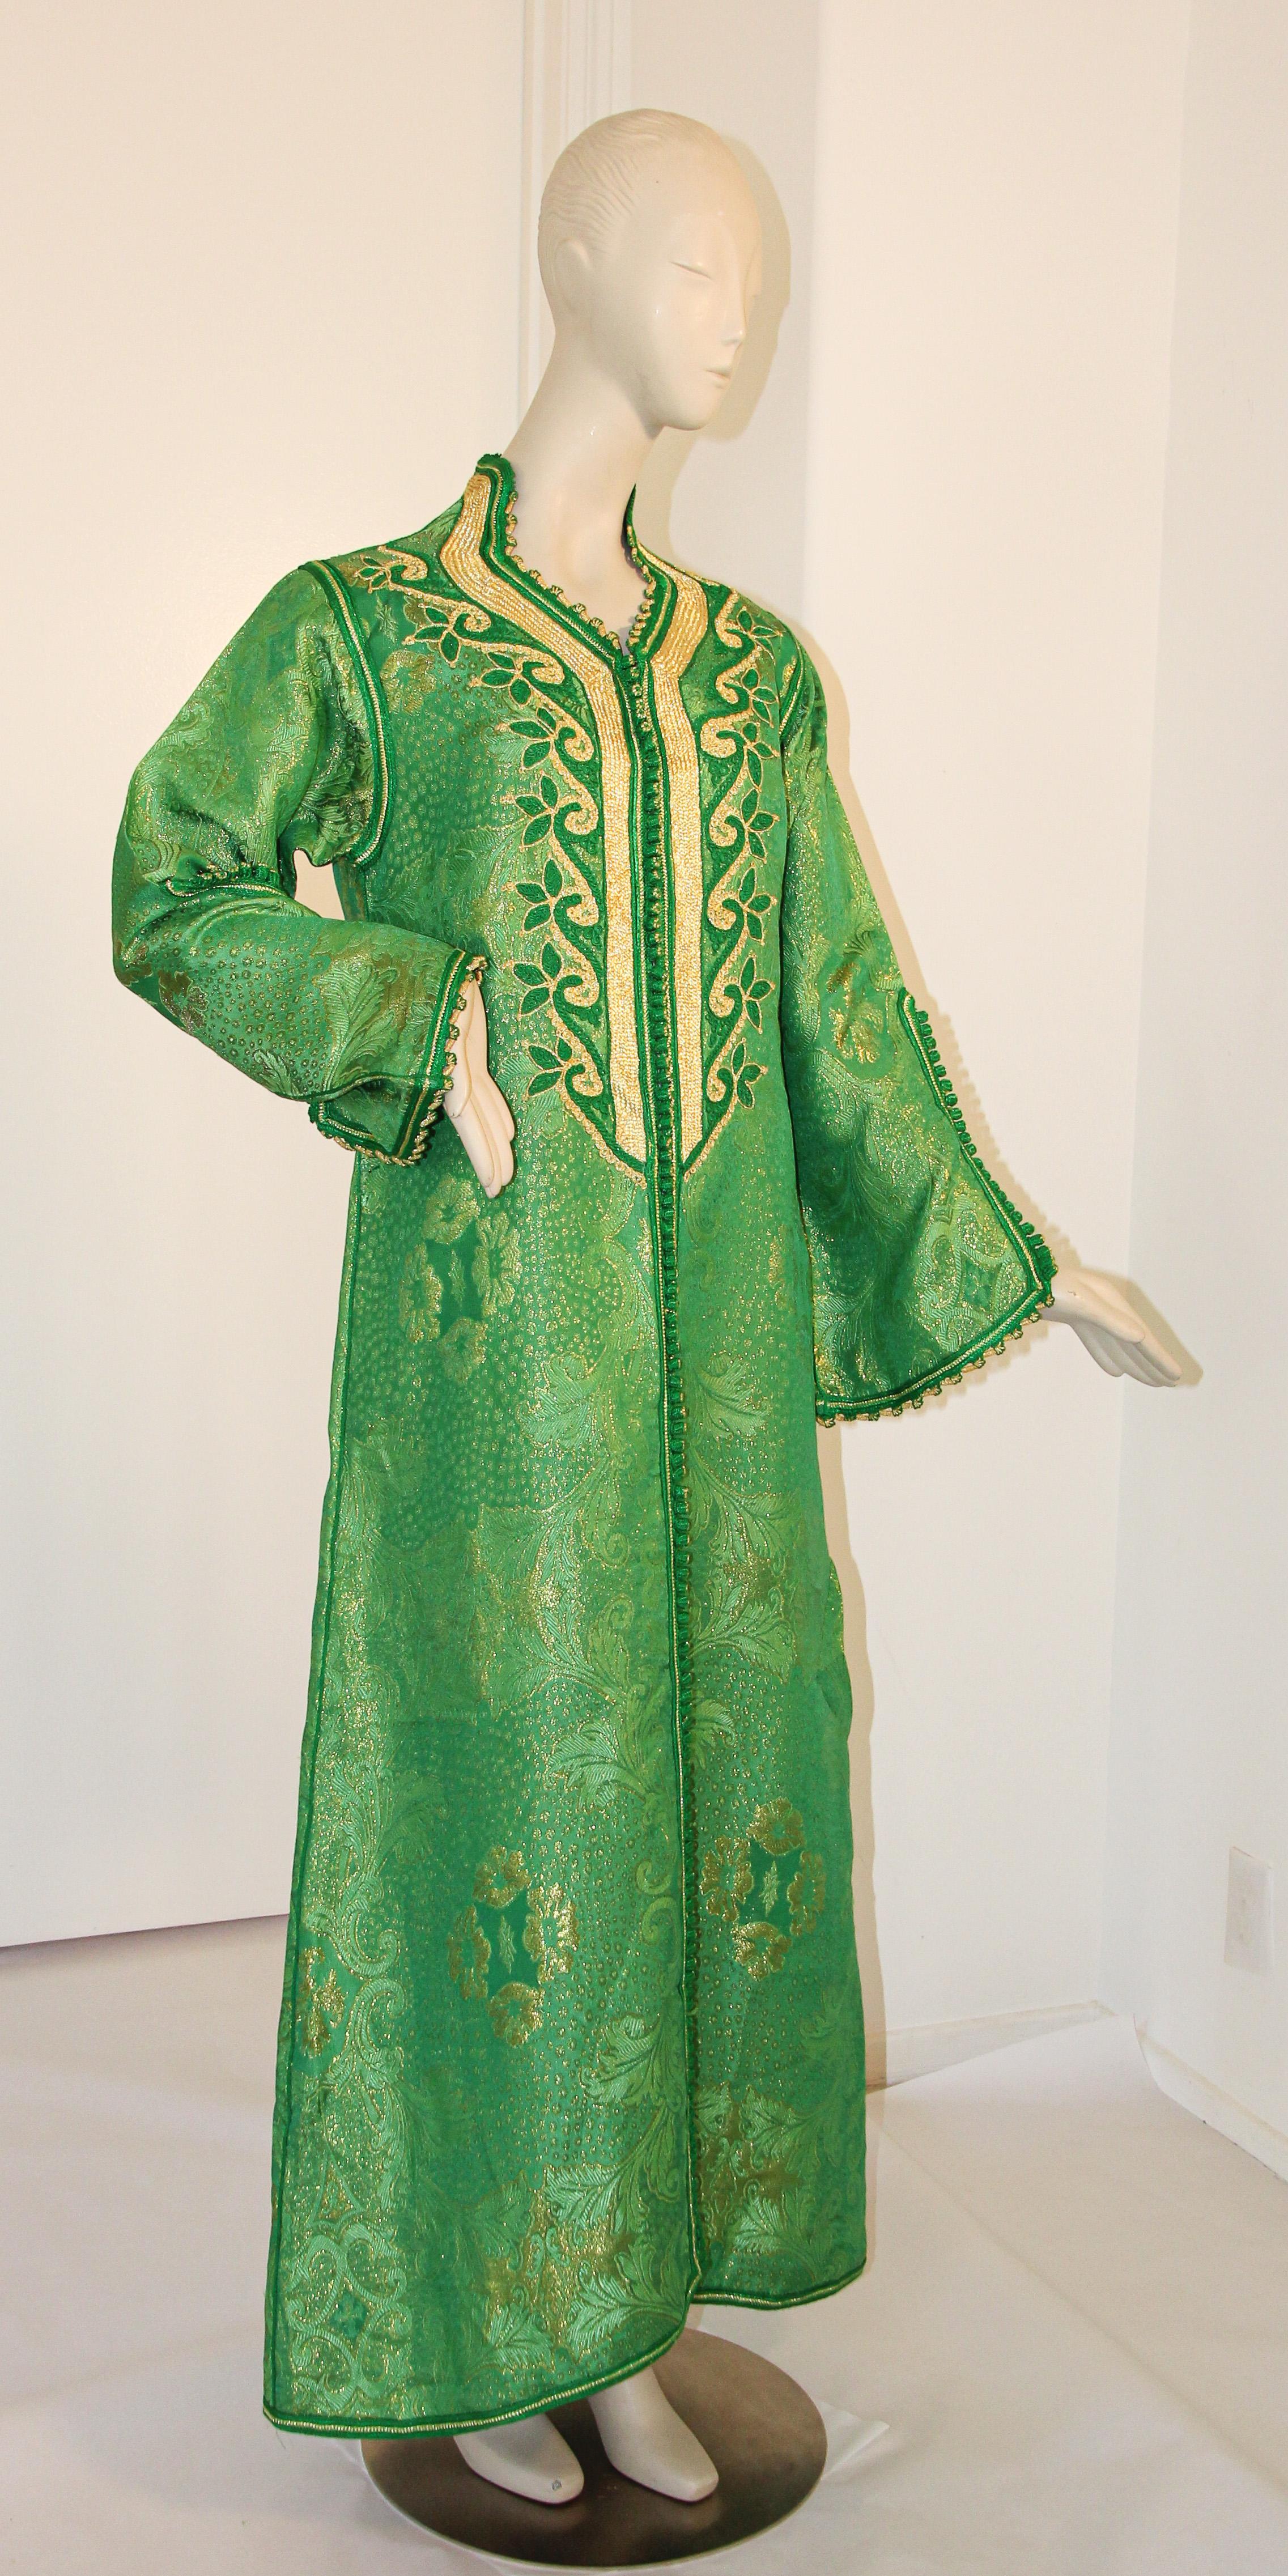 1960s Elegant Moroccan caftan emerald green and gold lame metallic brocade,
This is an exceptional example of Moroccan fashion,
Handcrafted in Morocco and tailored for a relaxed fit with wide sleeves, it is made in the traditional form of a Vintage